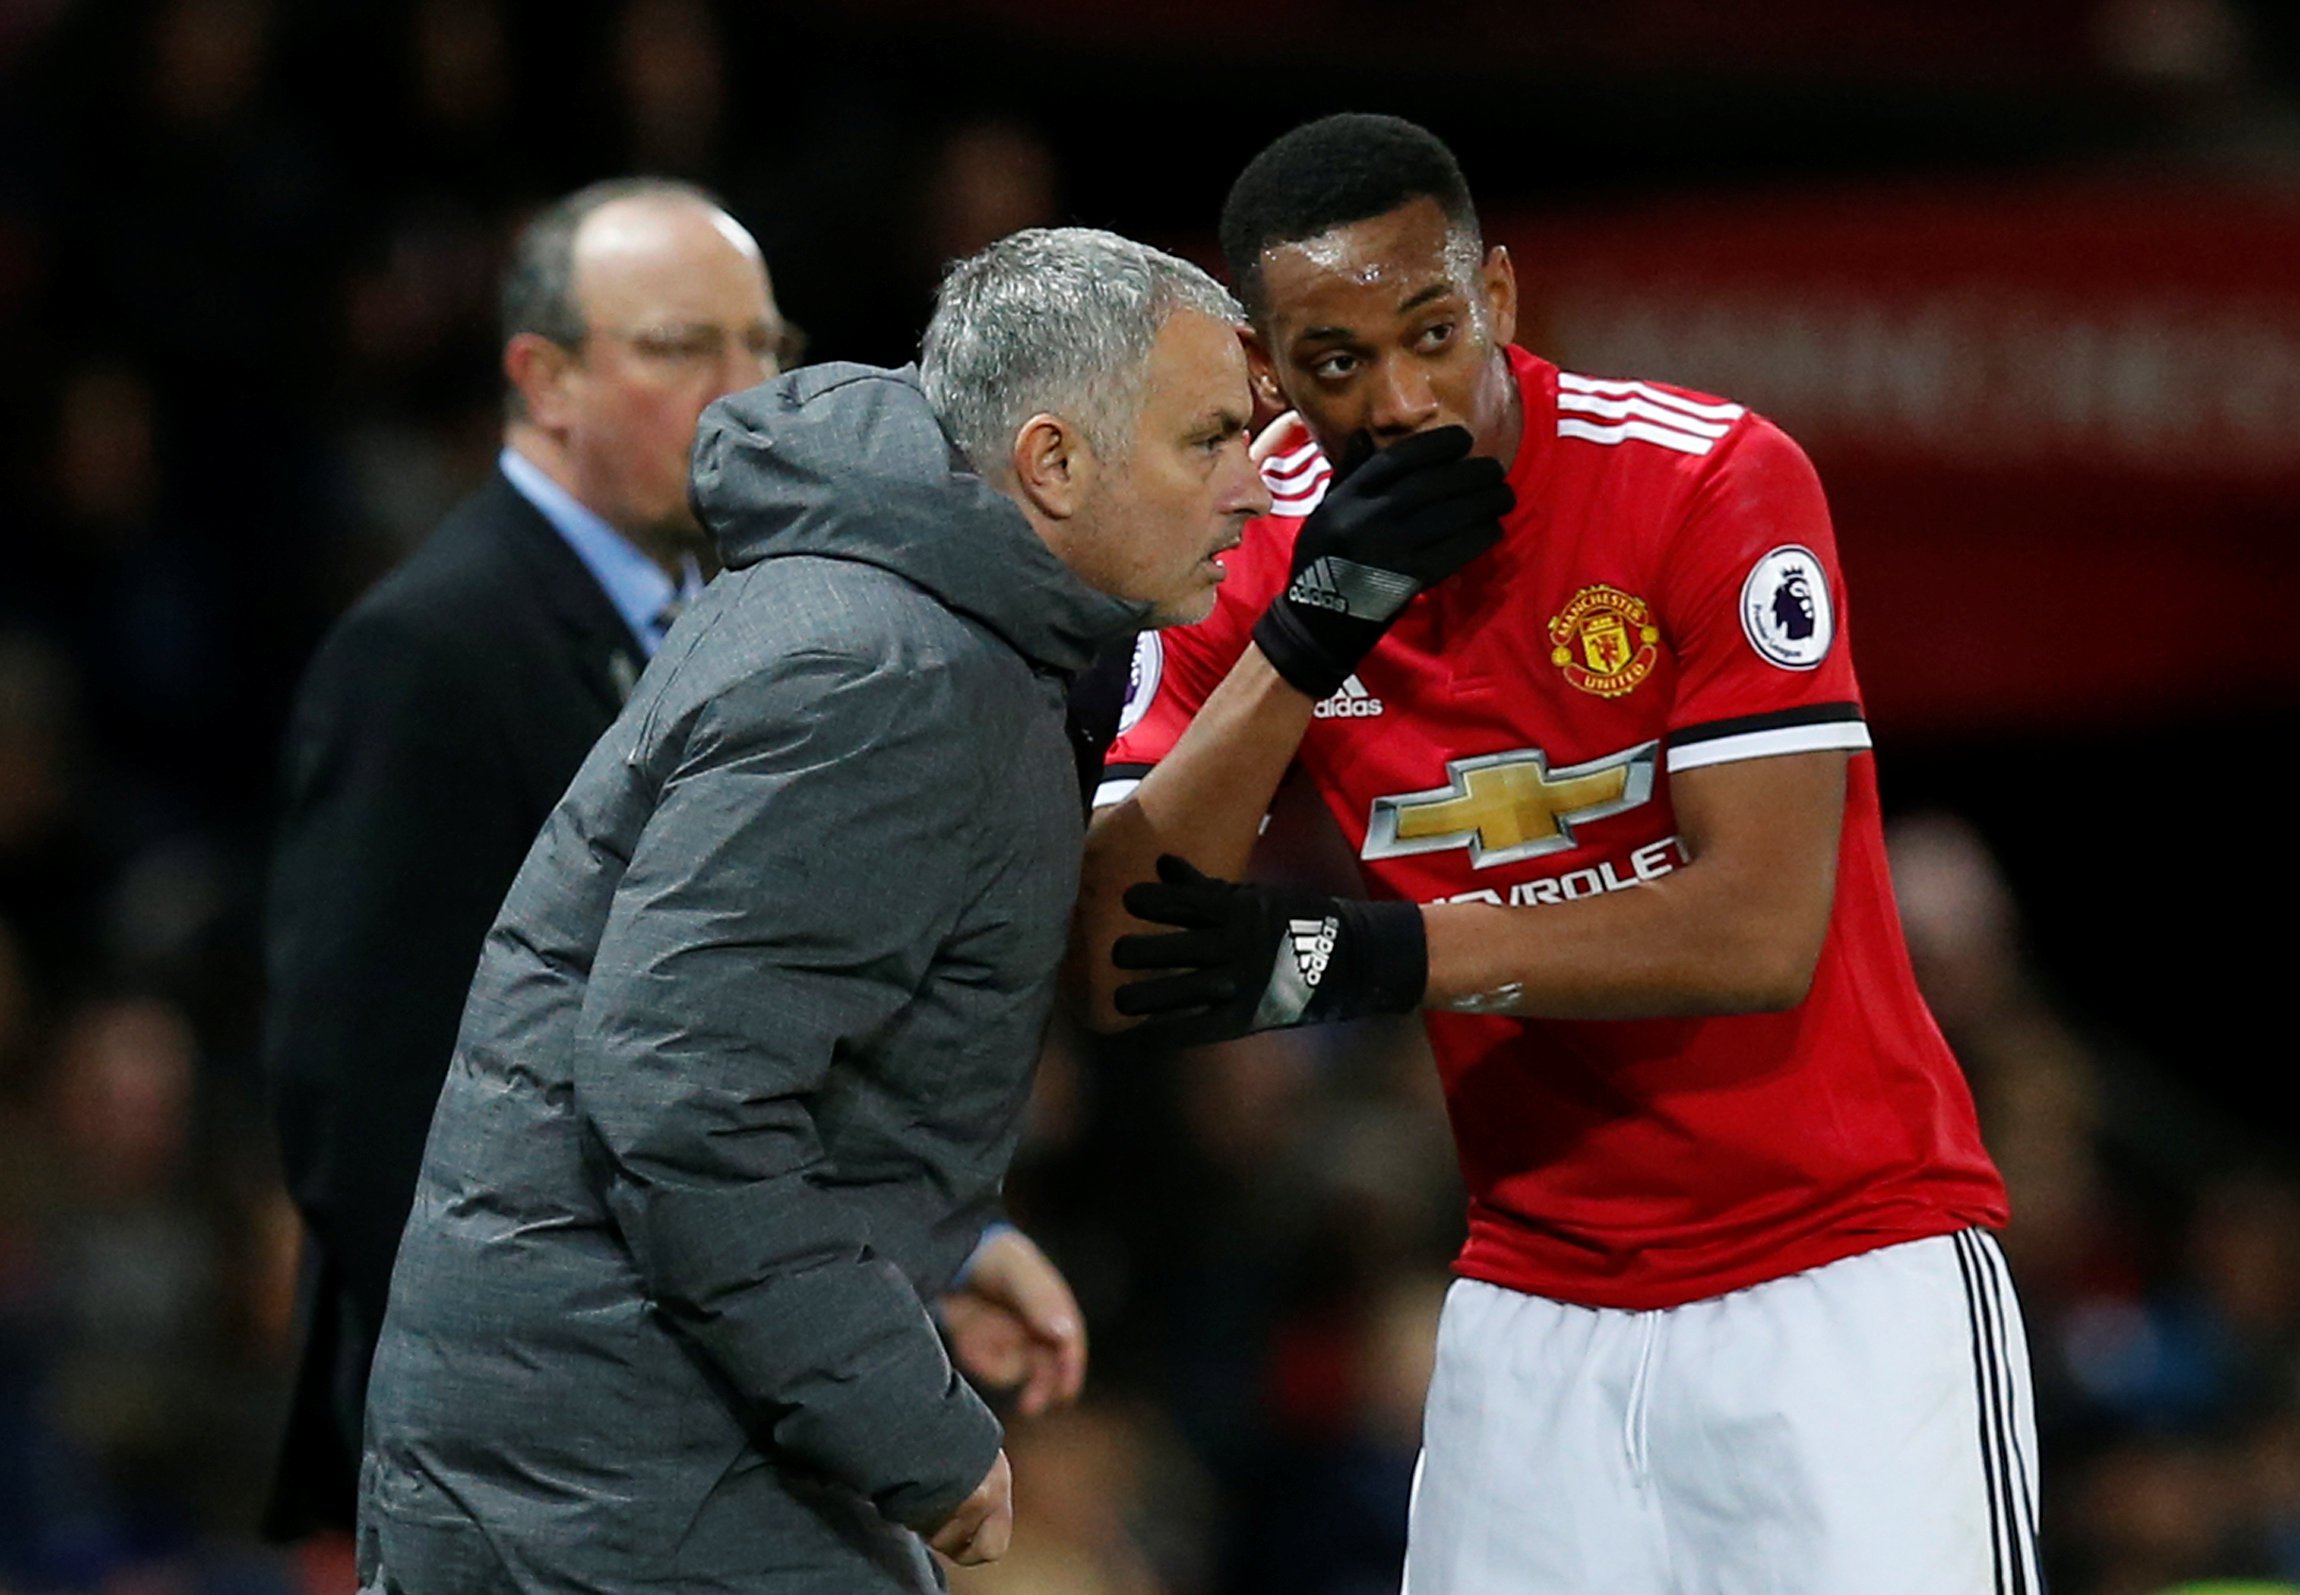 Chelsea send message to Manchester United star Anthony Martial over Antonio Conte